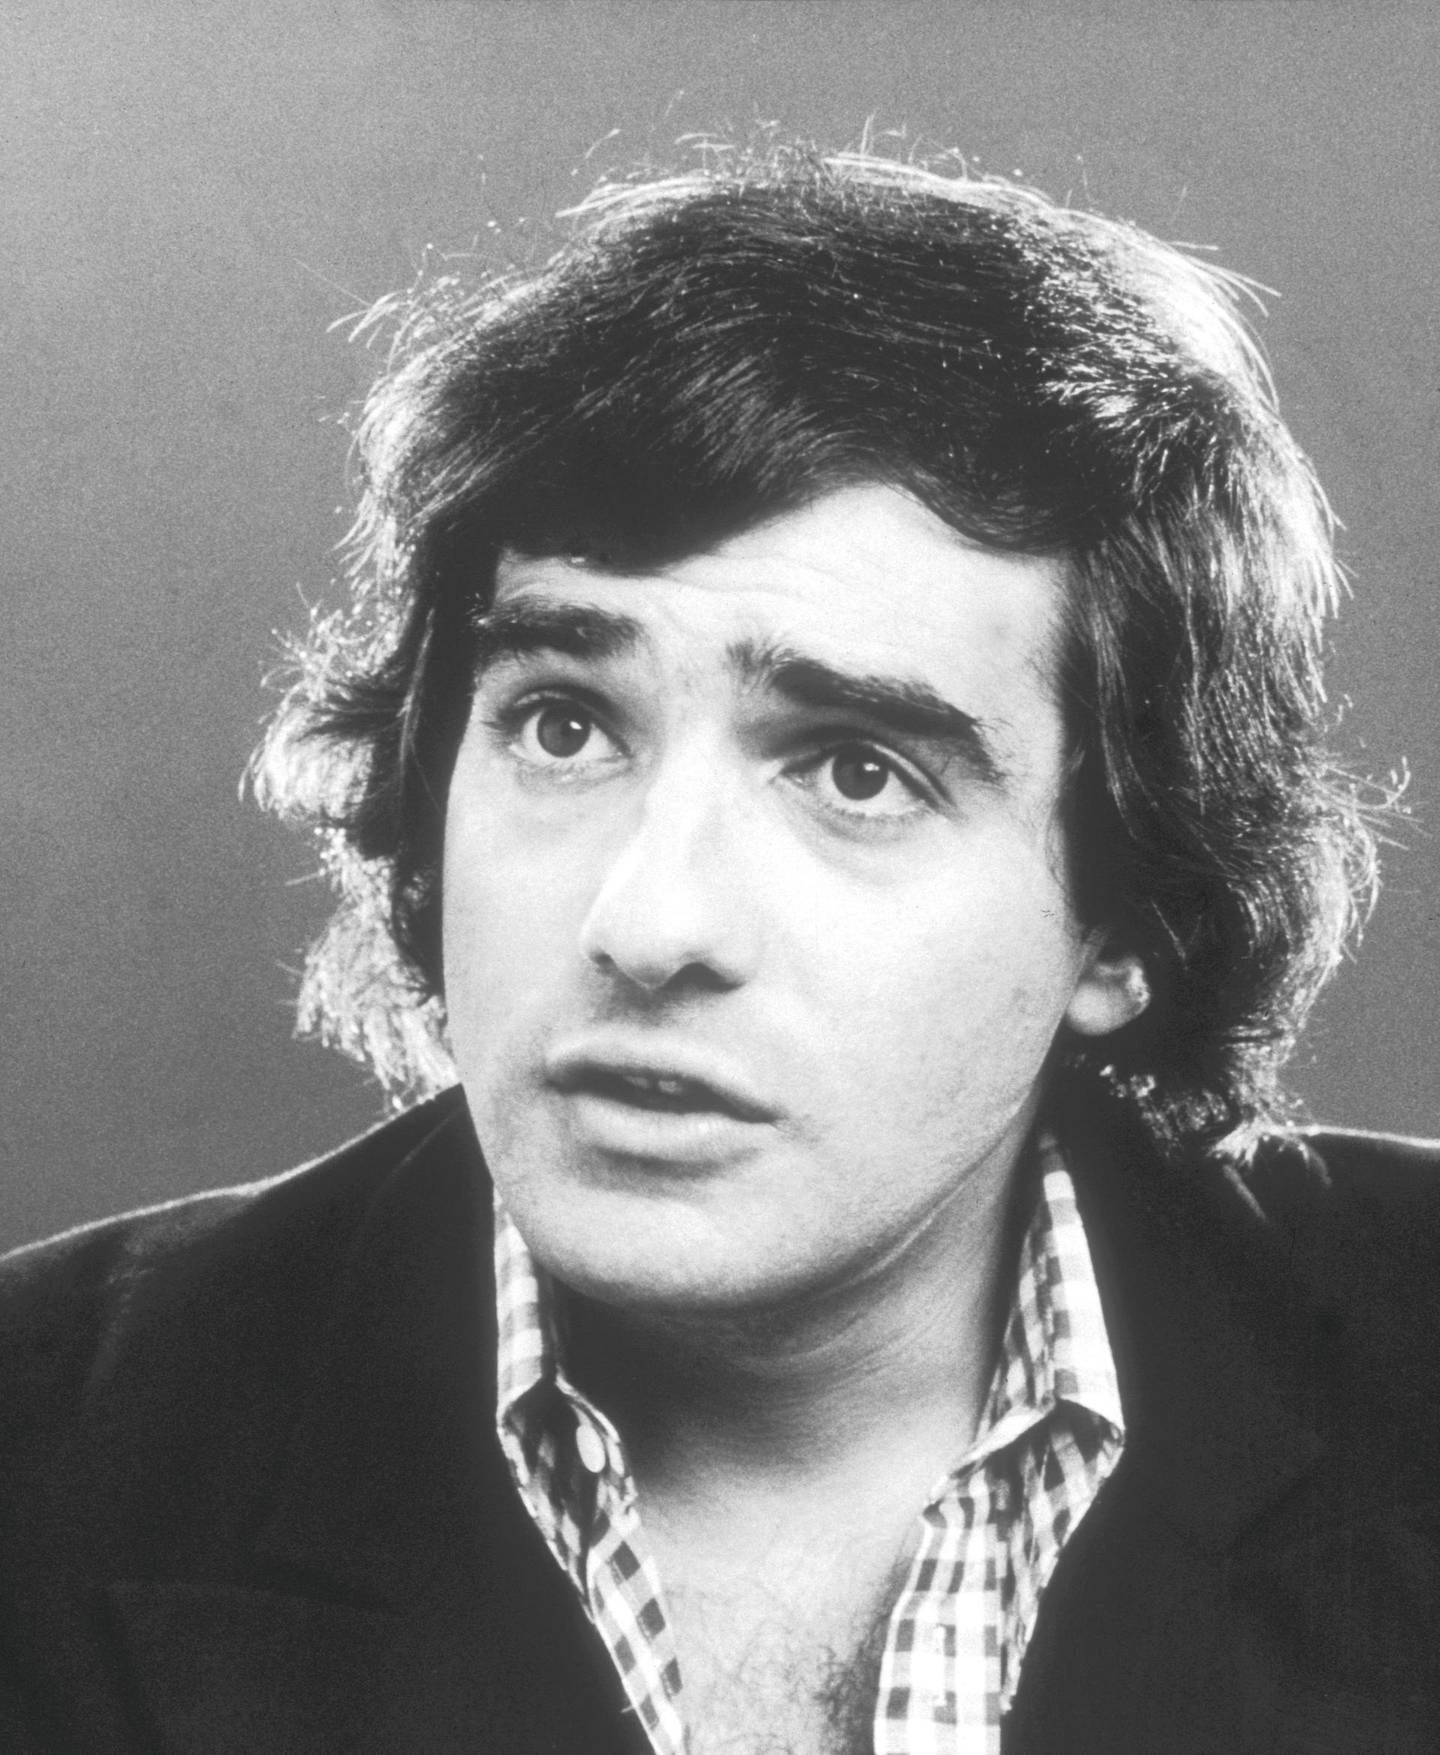 Headshot of American film director Martin Scorsese speaking, 1973.  (Photo by Gene Maggio/Getty Images)